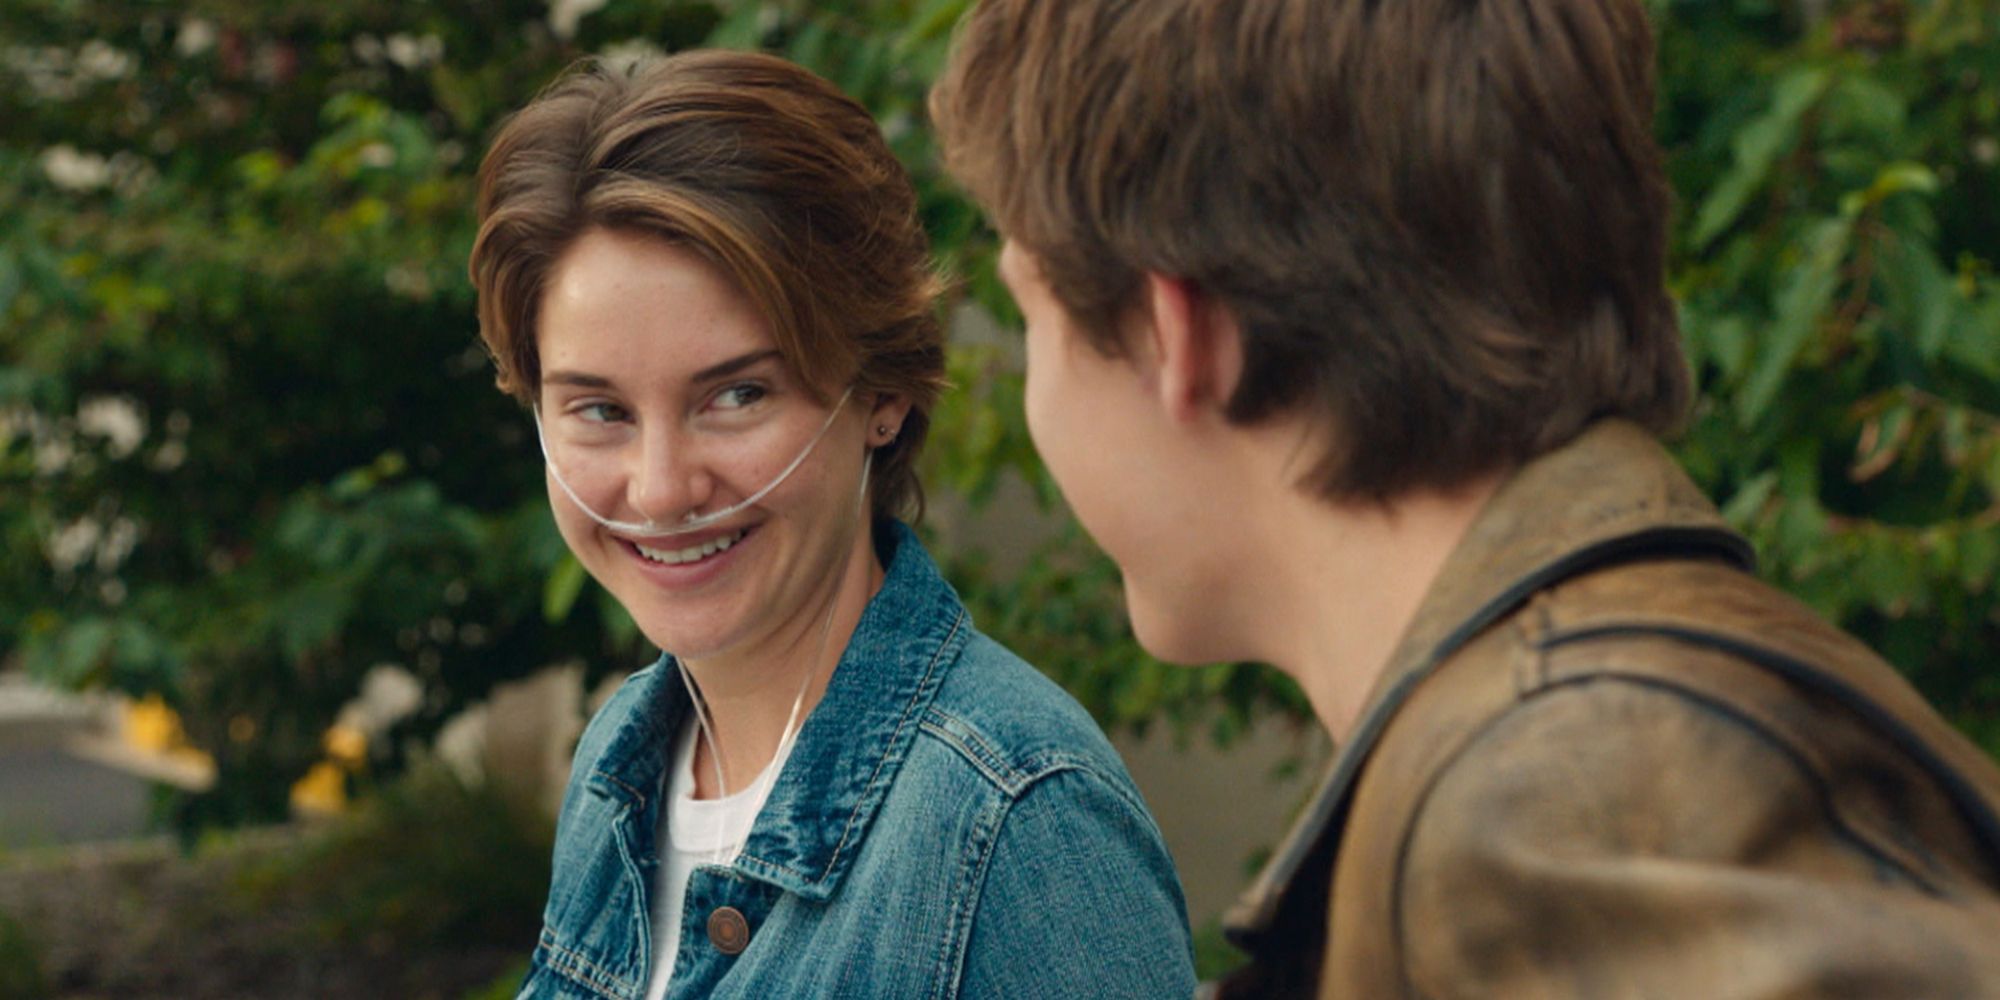 Shailene Woodley with a nasal cannula sitting with Ansel Elgort in The Fault in Our Stars